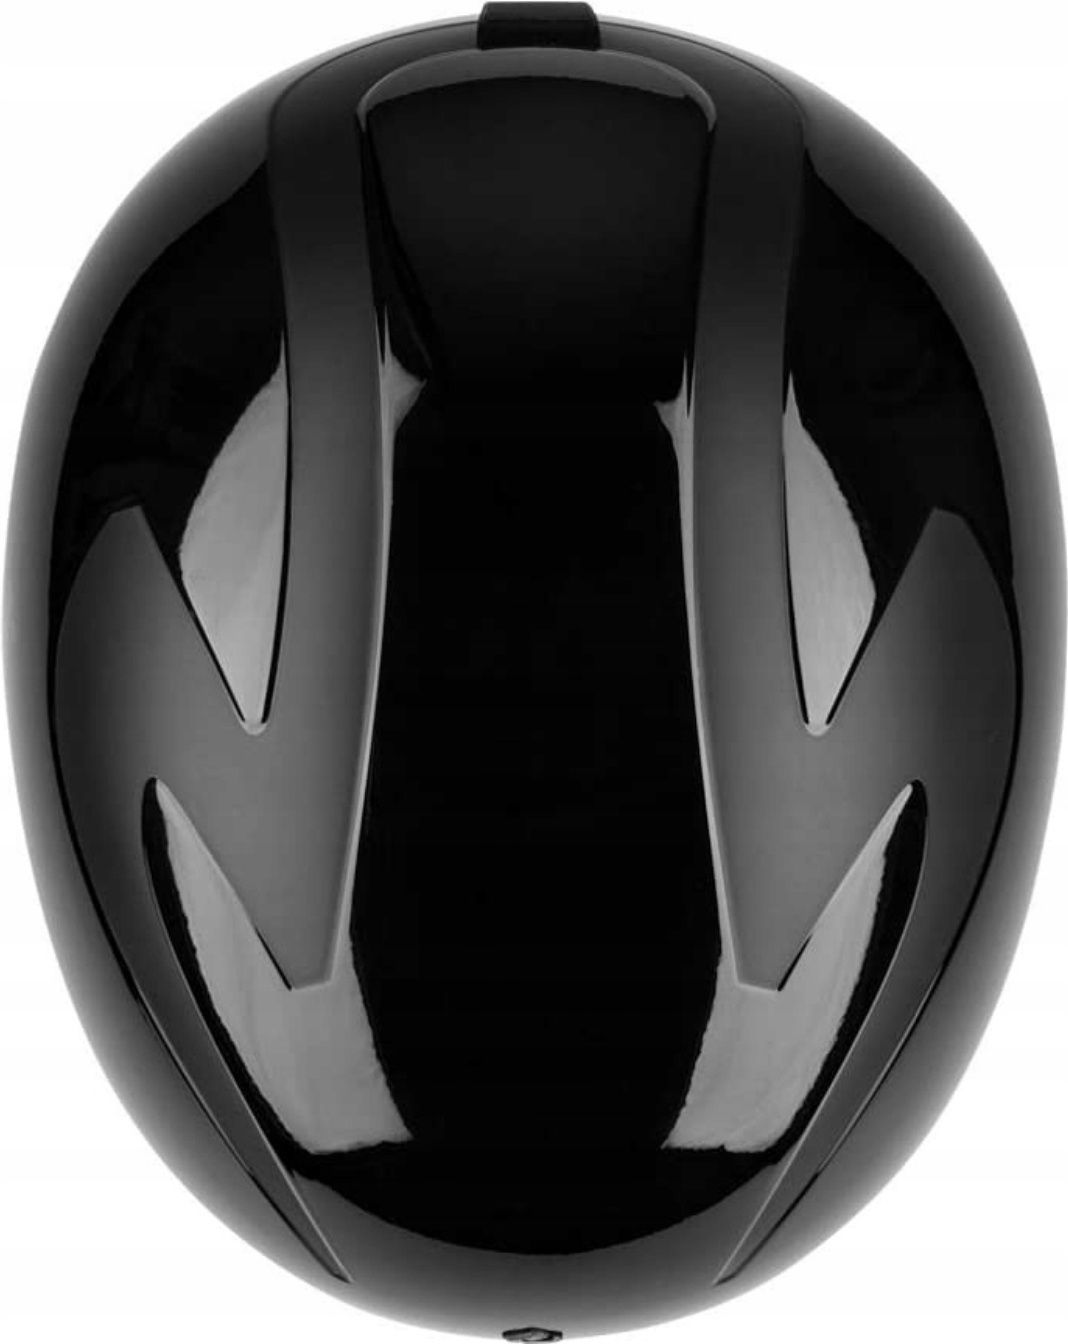 Kask Sweet Protection Volata MIPS M/L 56-59 cm